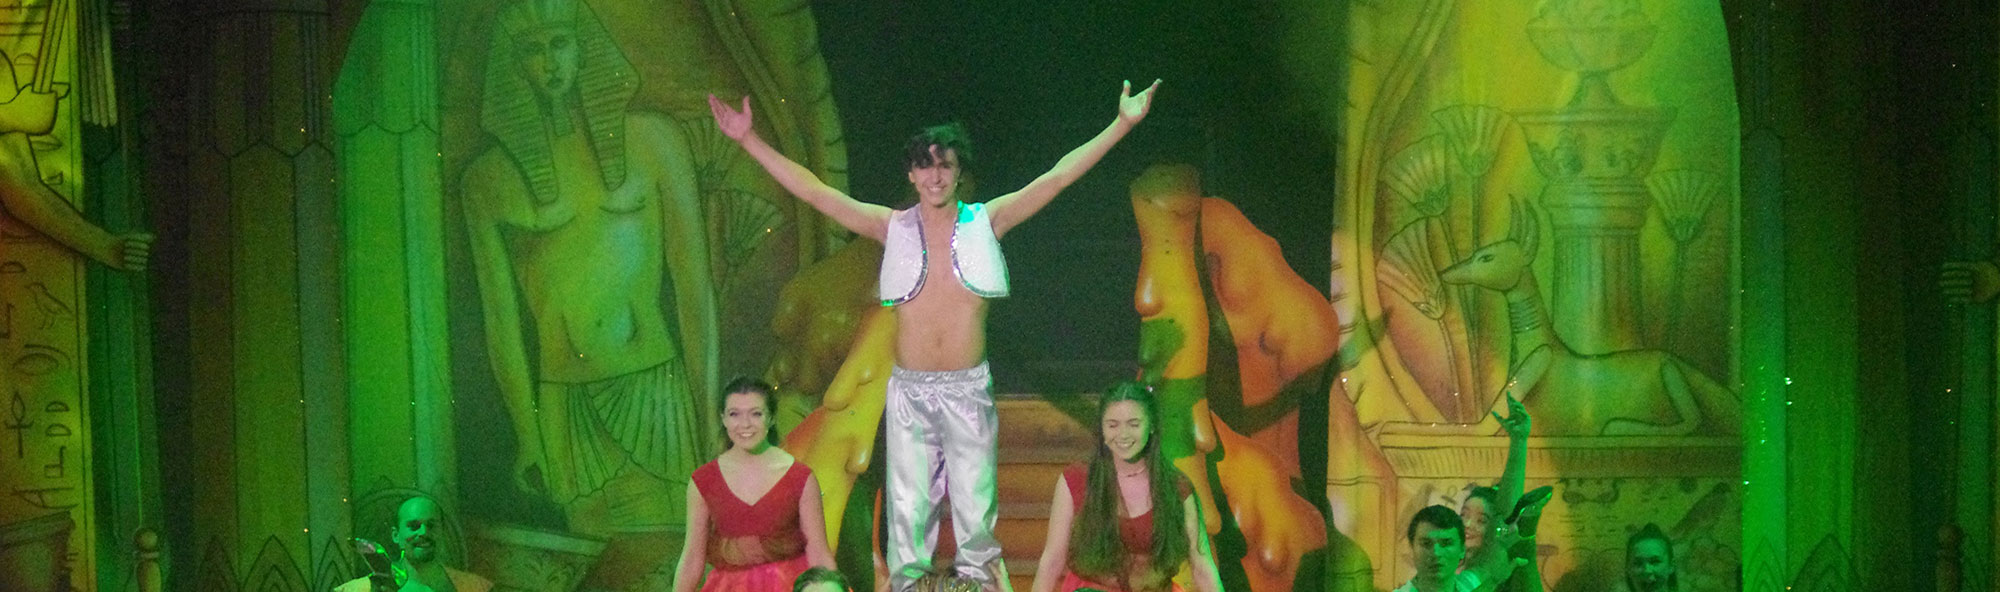 Wardens Theatre Company’s 'Aladdin' at the Aberystwyth Arts Centre - (C) Stephen Griffiths